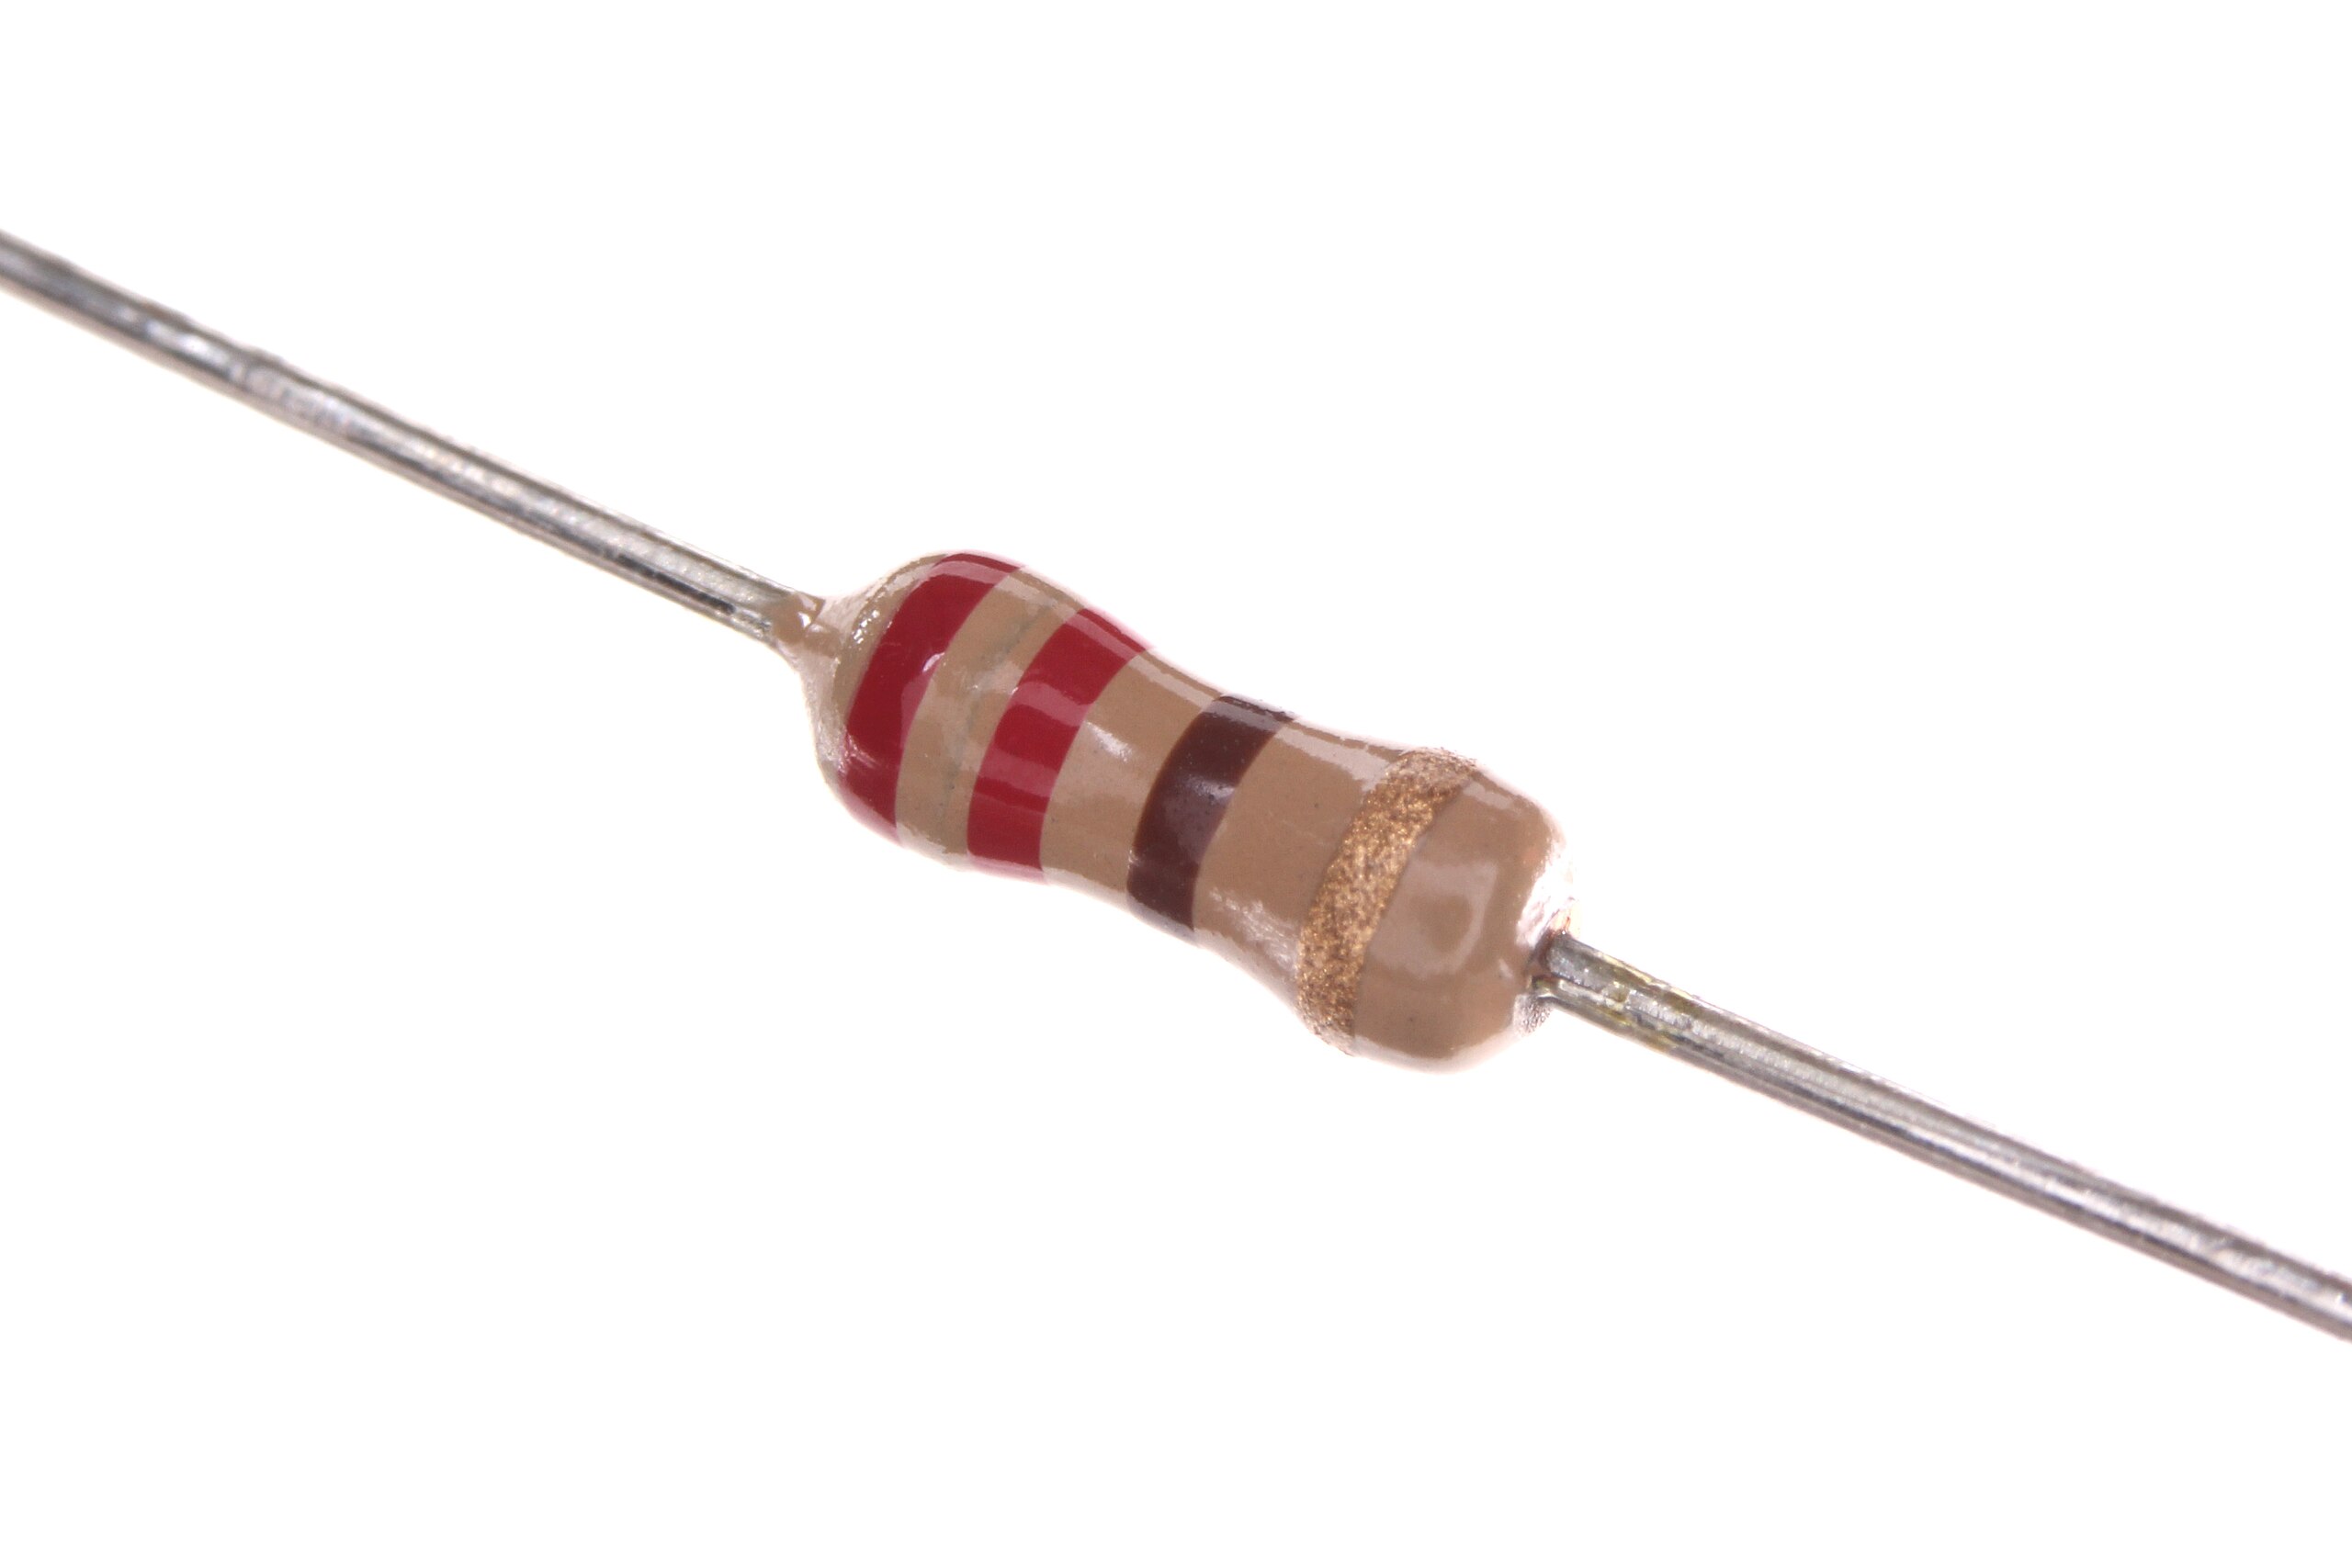 restante cable Combatiente File:220 ohms 5% axial resistor.jpg - Wikimedia Commons